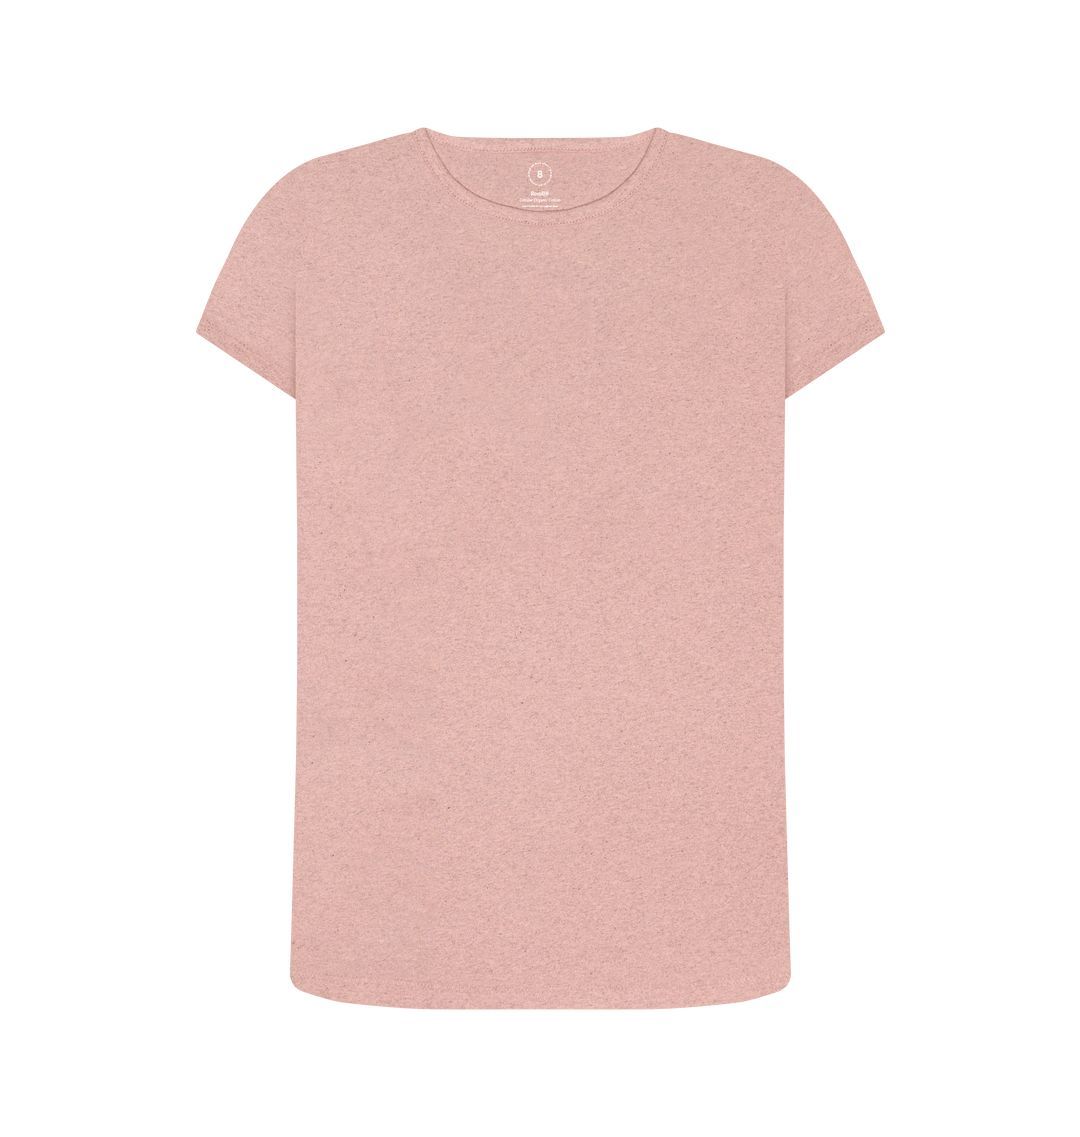 Sunset Pink Women's sustainable essential t-shirt